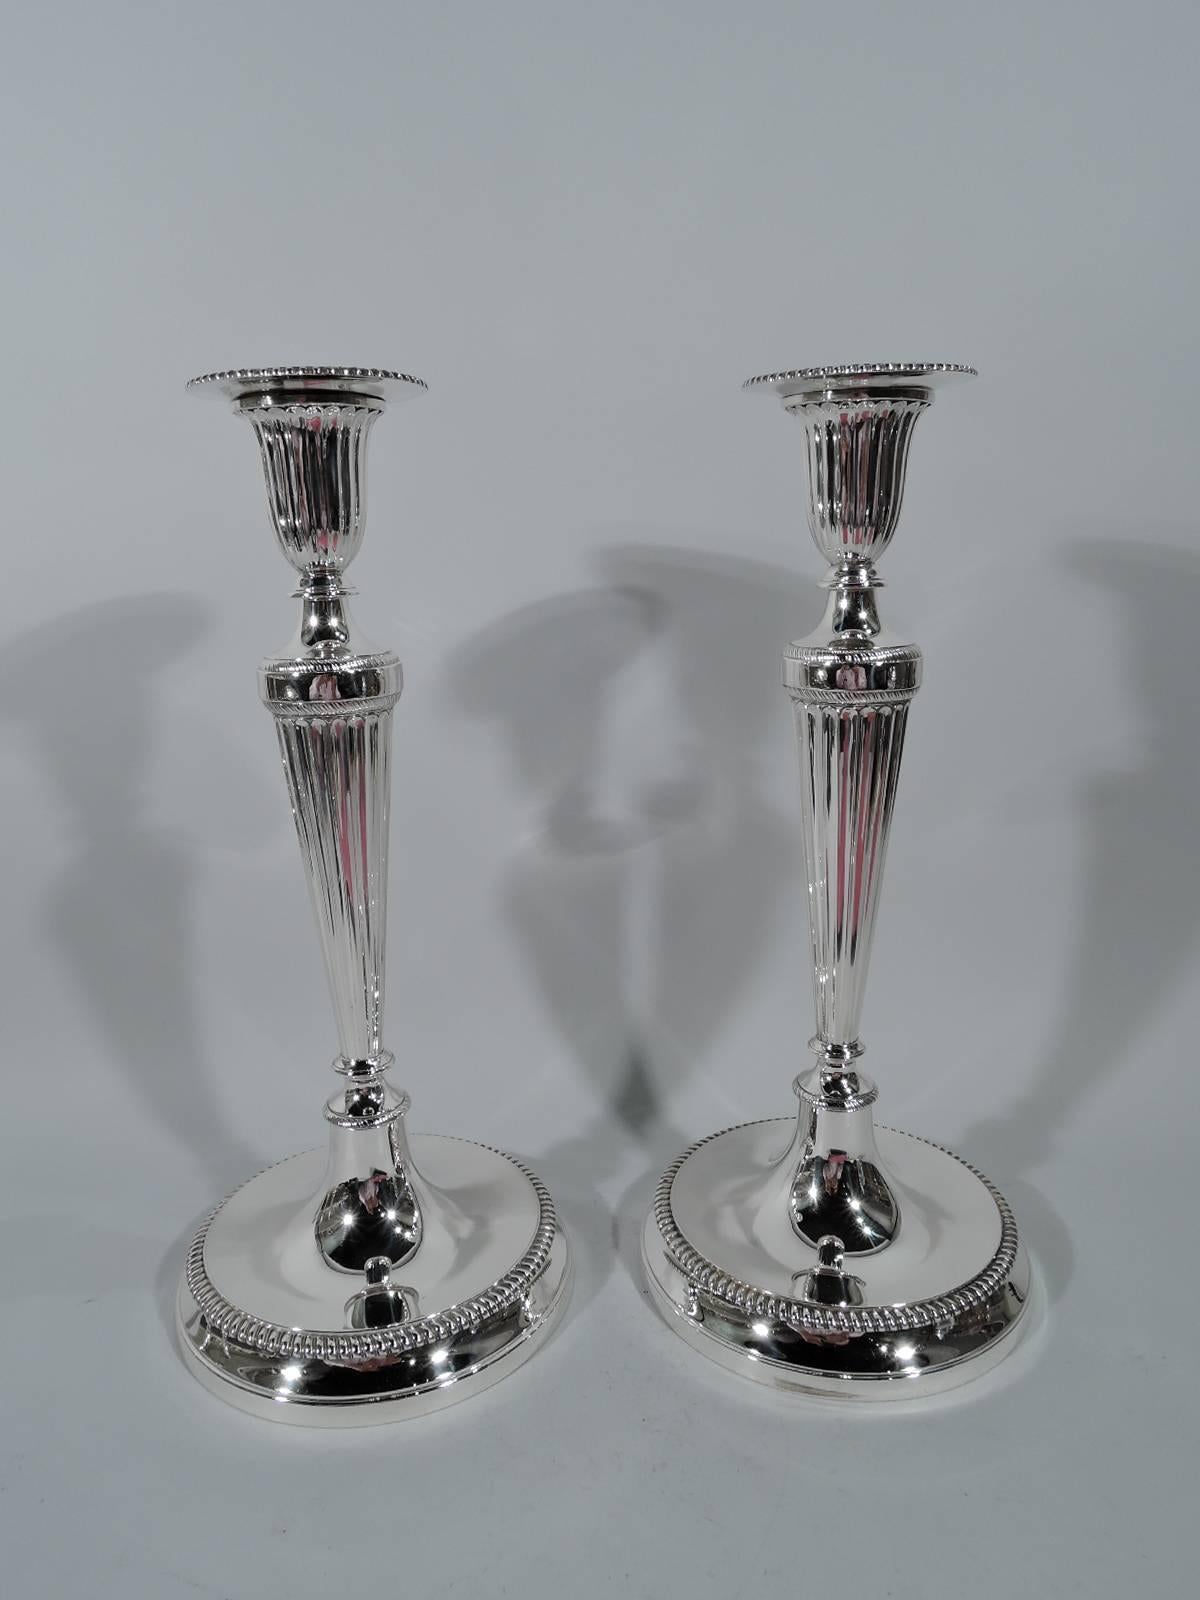 Set of four big and bold sterling silver candlesticks. Made by Tiffany & Co. in New York, circa 1917. Each: Fluted Classical column with same socket, detachable bobeche, and domed foot. Gadrooning and egg-and-dart ornament. Historic design that